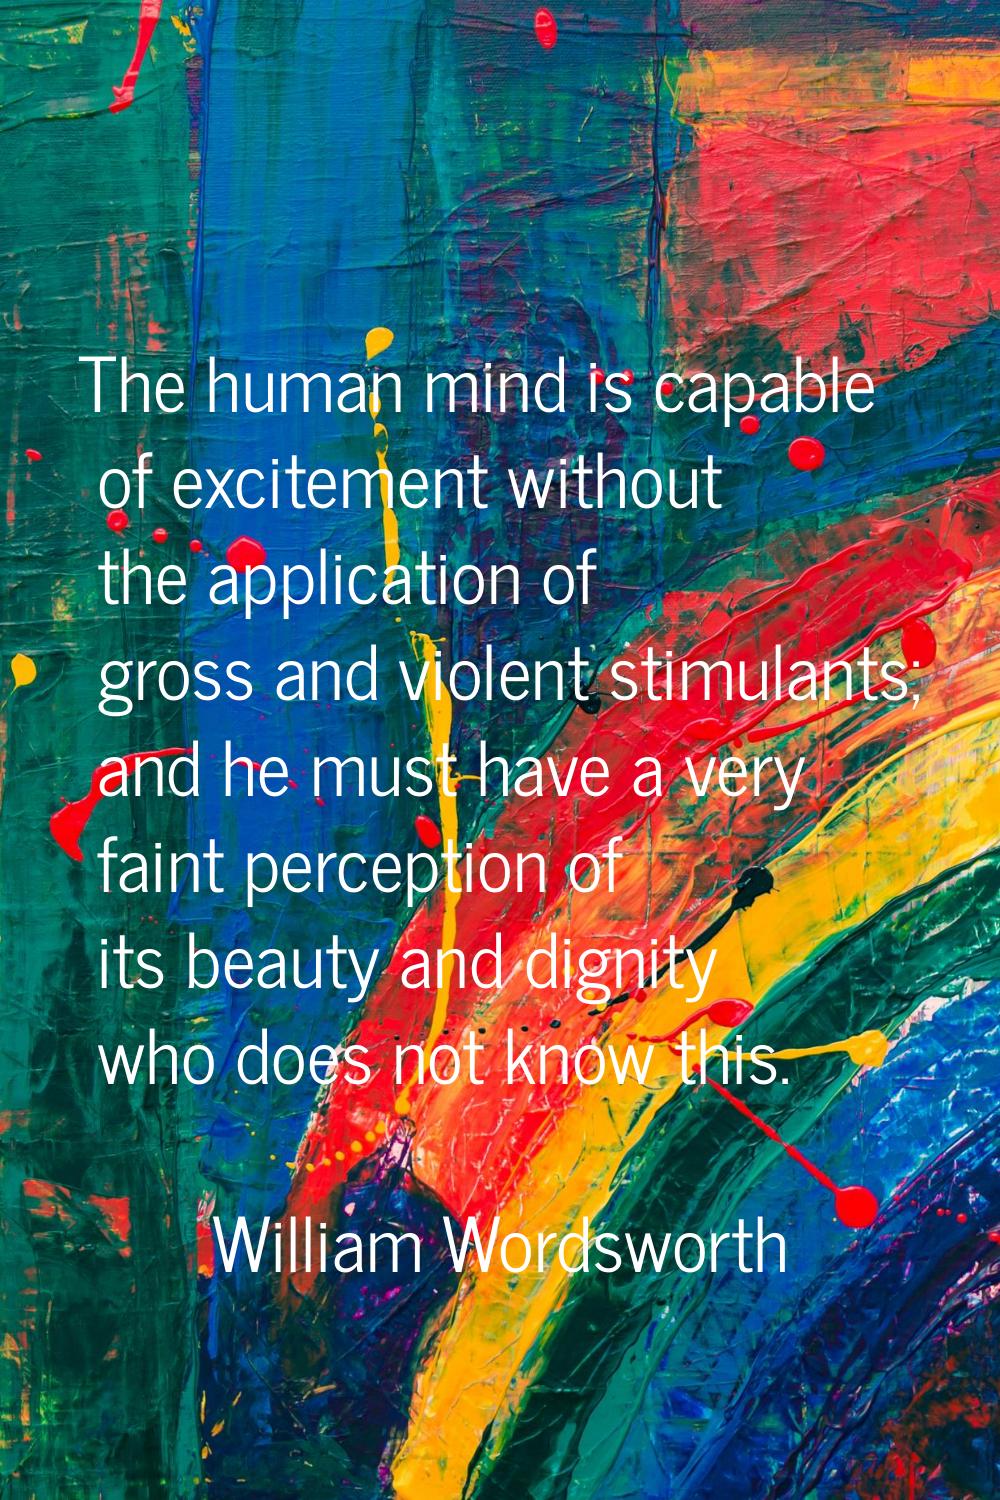 The human mind is capable of excitement without the application of gross and violent stimulants; an